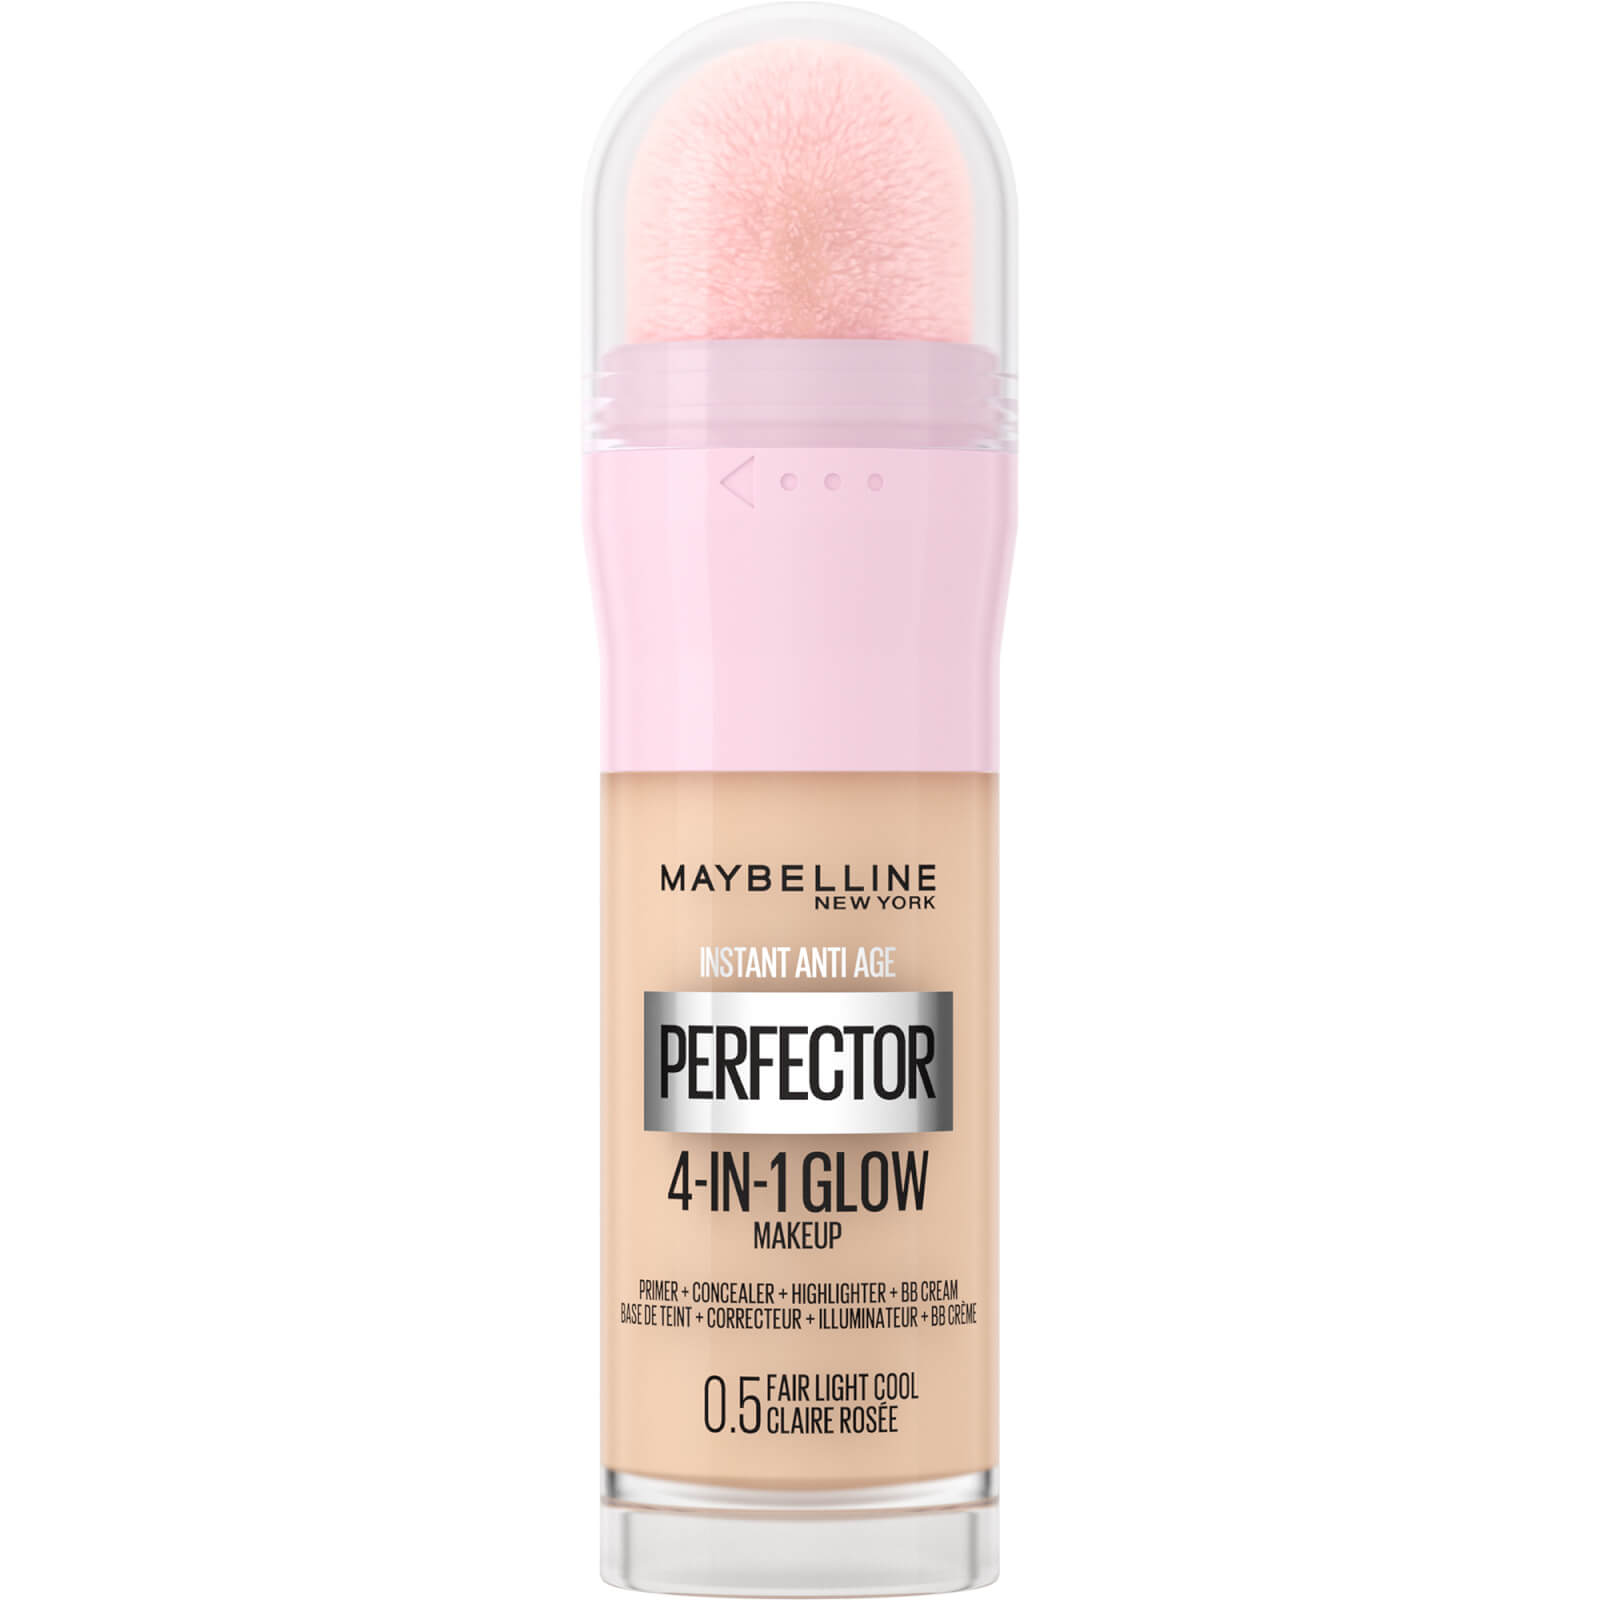 Image of Maybelline Instant Anti Age Perfector 4-in-1 Glow Primer, Concealer, Highlighter, BB Cream 20ml (Various Shades) - Fair Light Cool